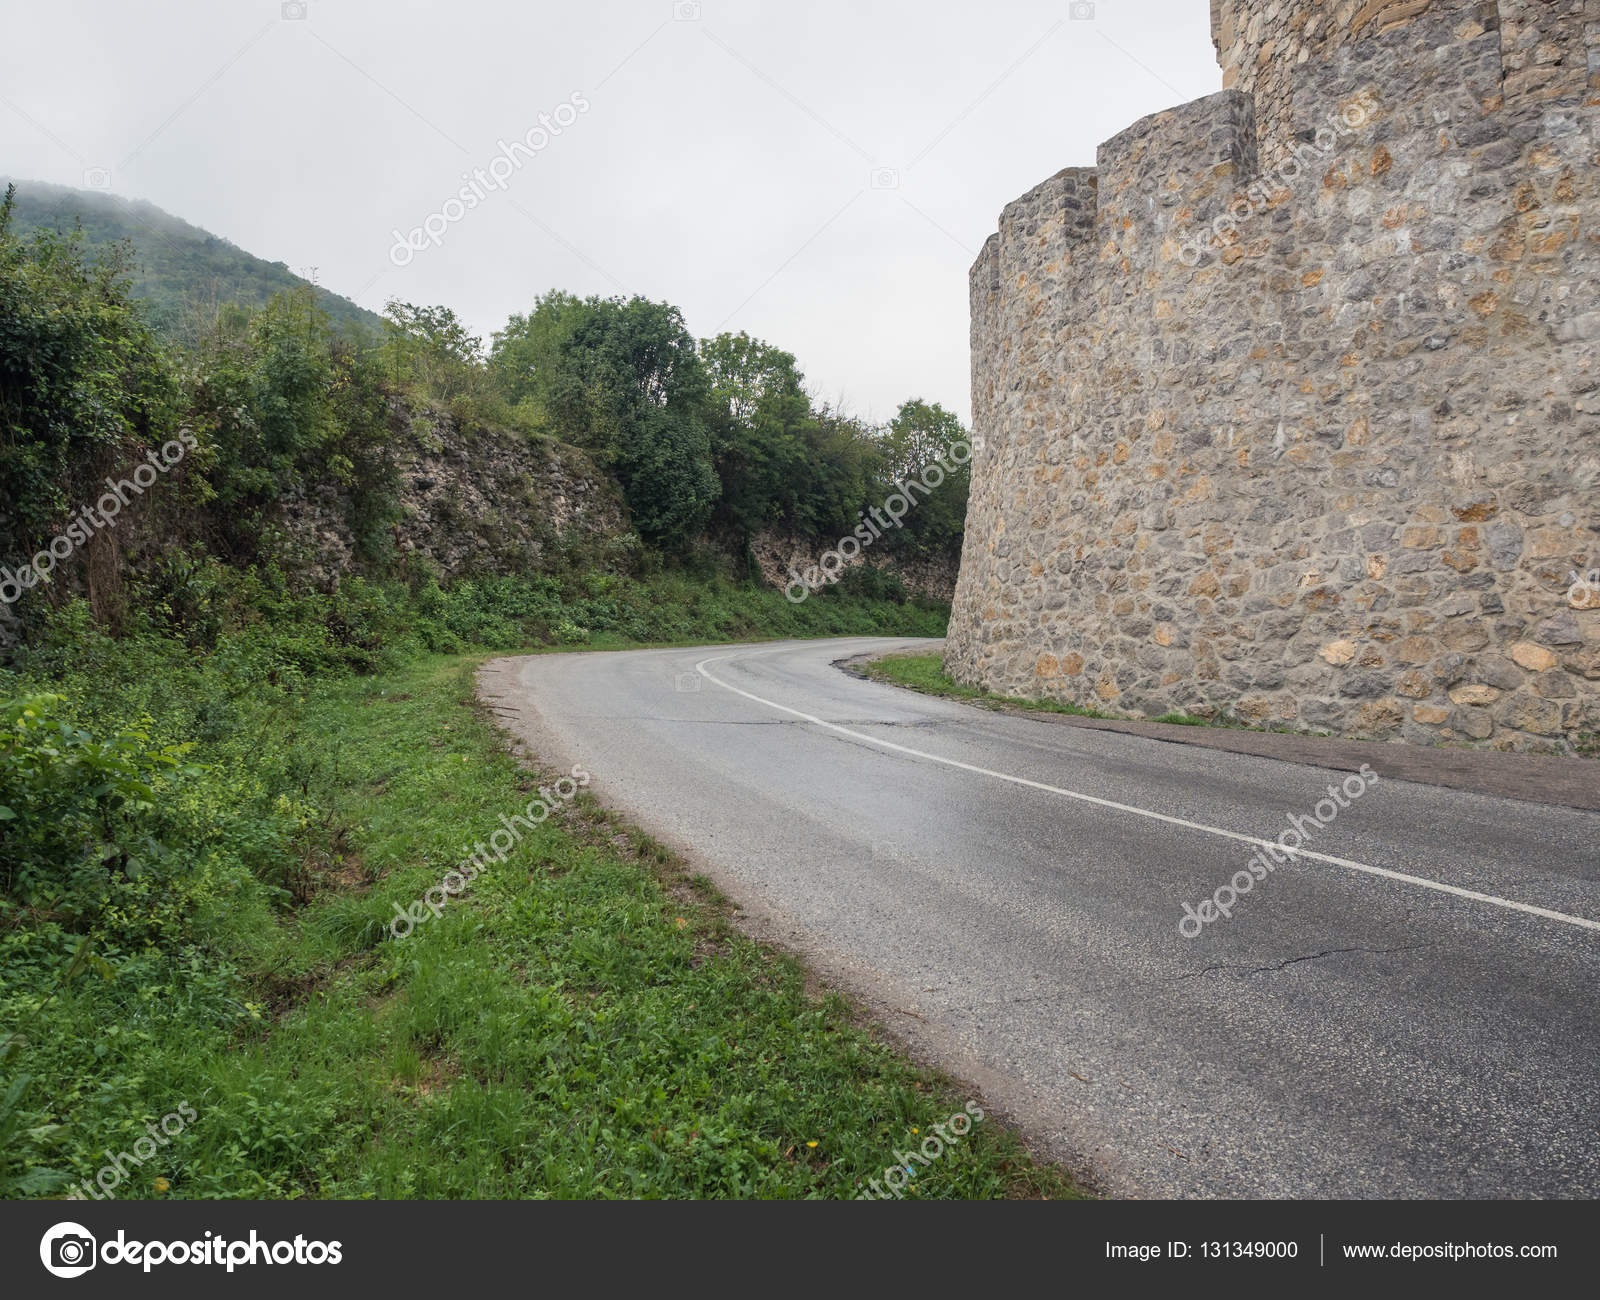 Road near the old castle wall — Stock Photo © master-erik #131349000